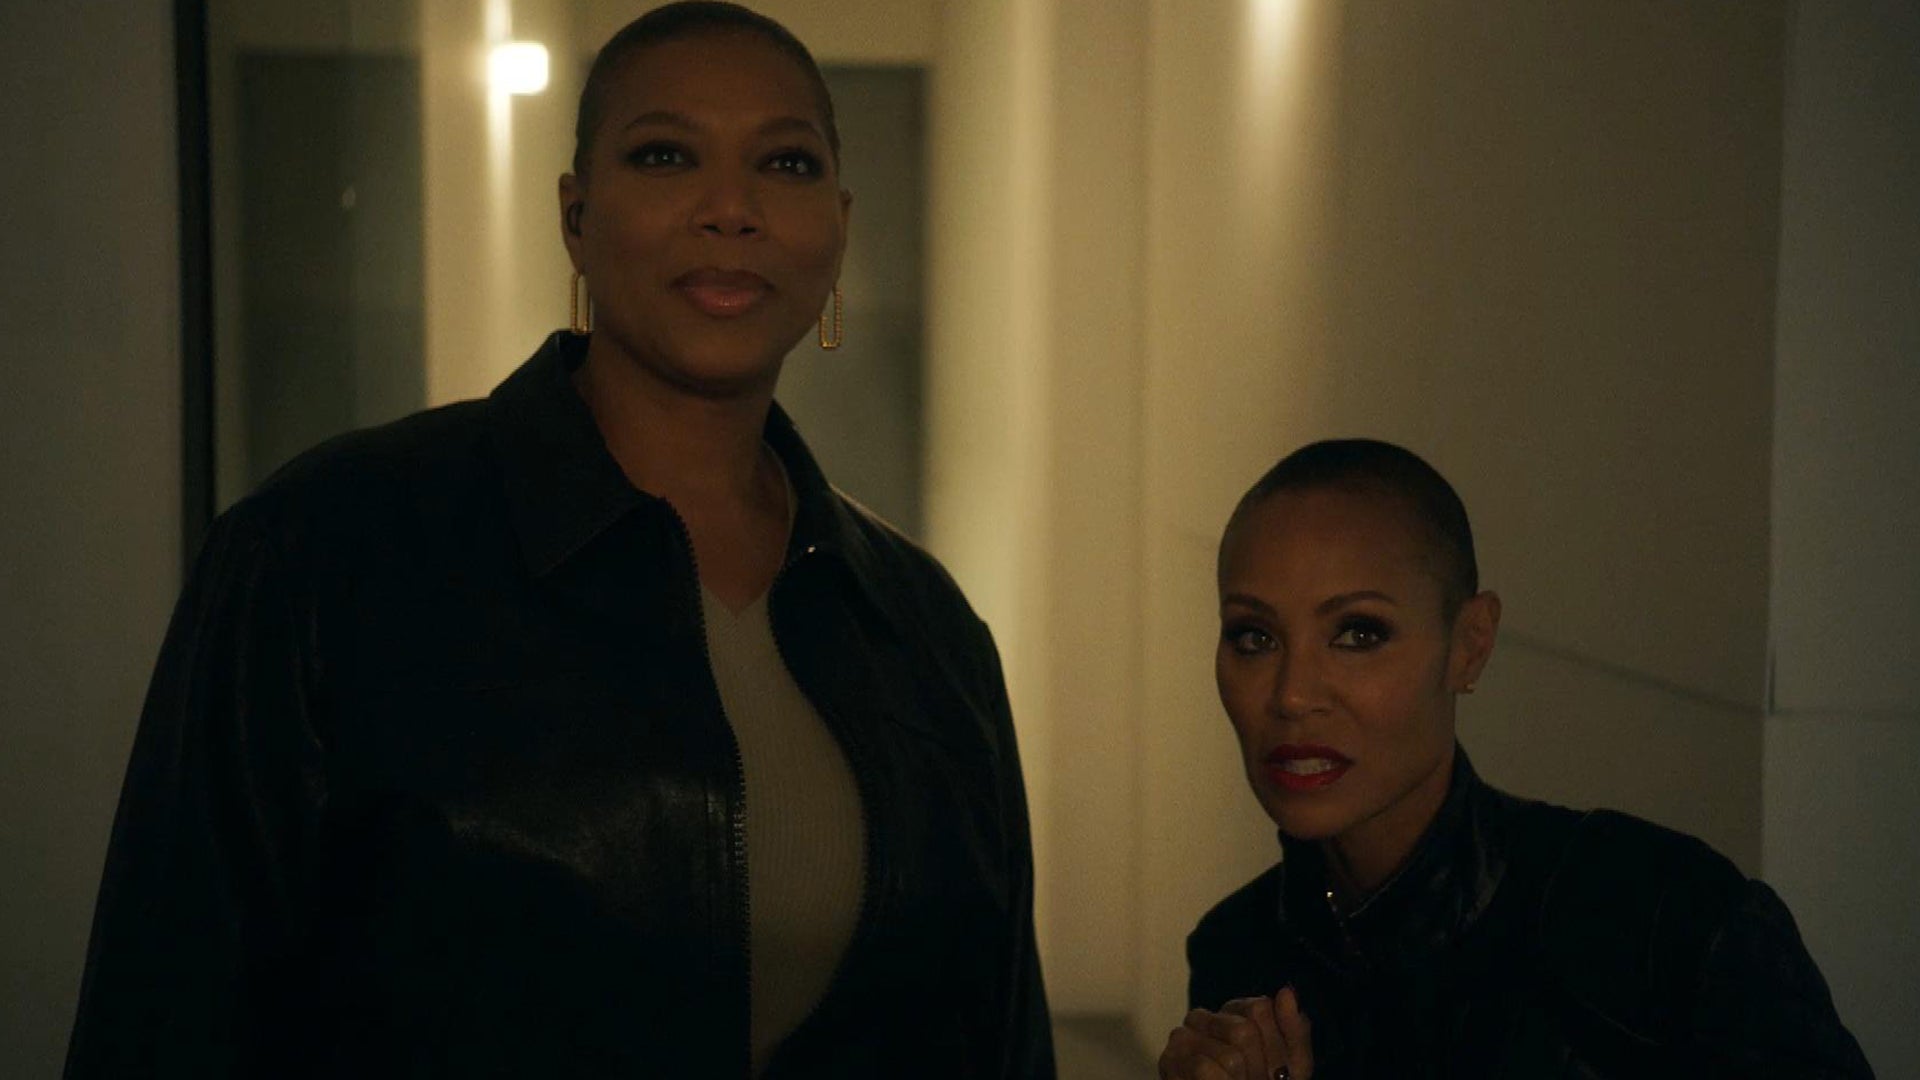 Jada Pinkett Smith and Queen Latifah Team Up for an 'Equalizer' Heist in First Look (Exclusive)